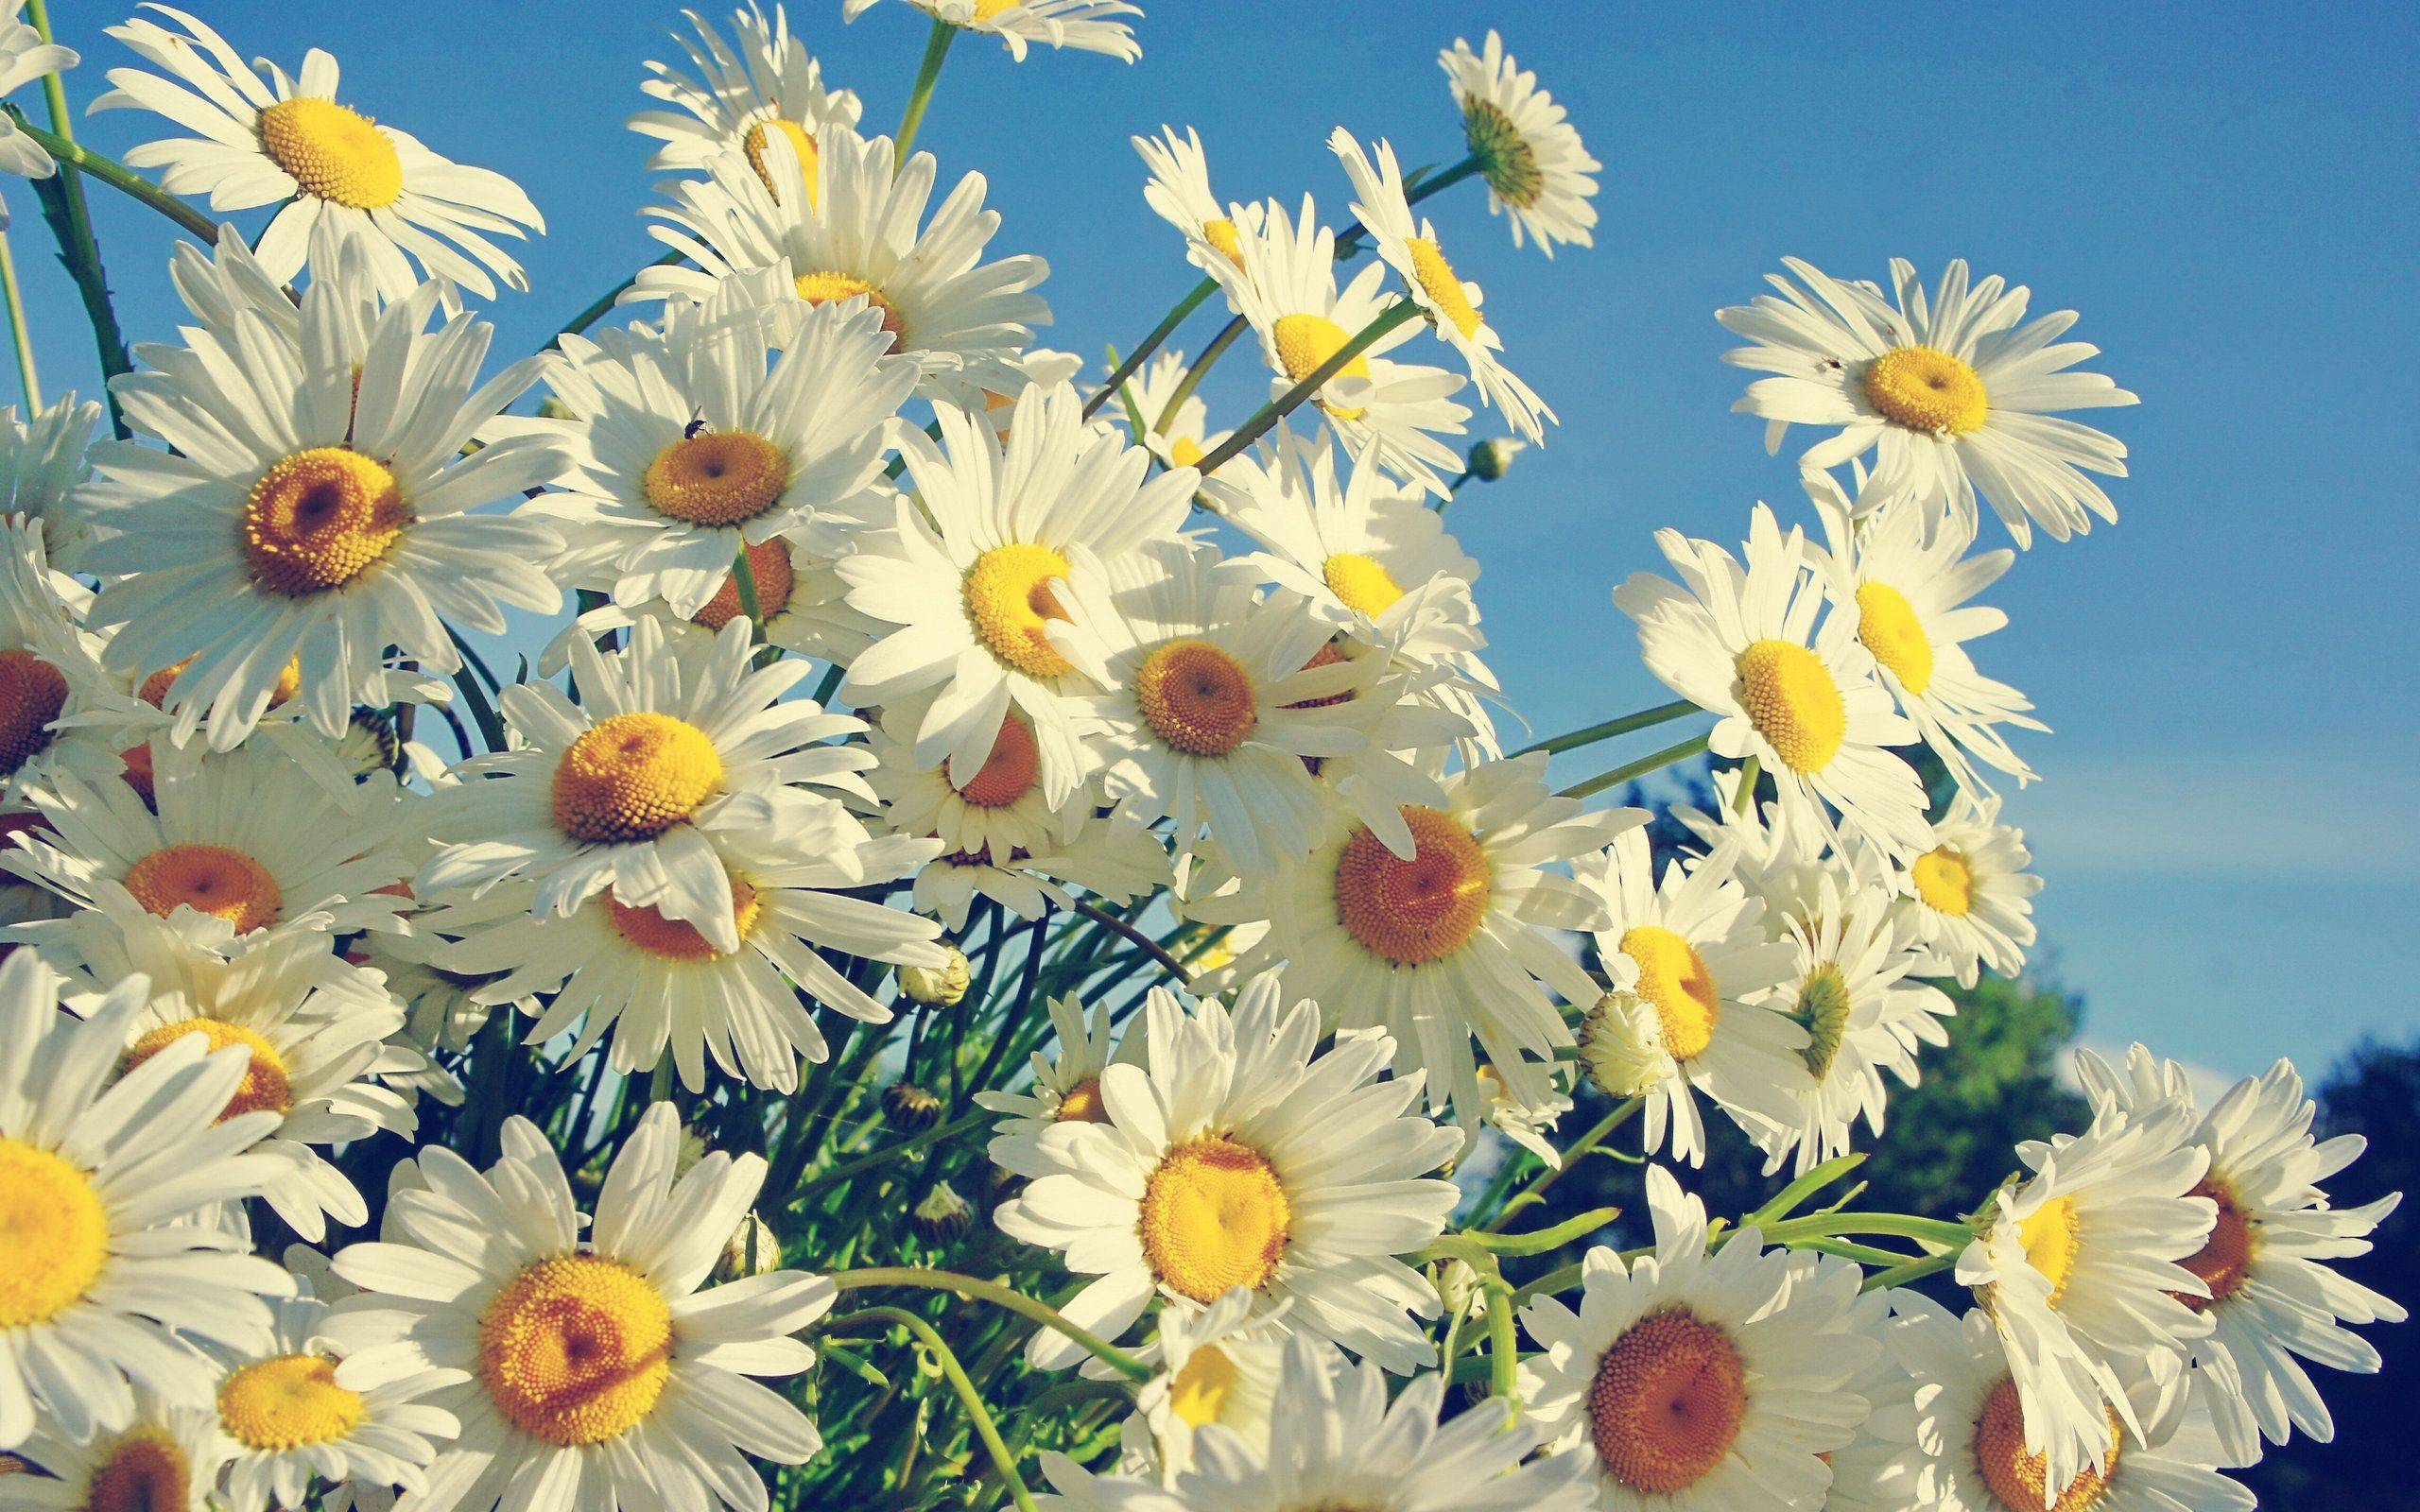 Daisy flower pictures and wallpapers Download